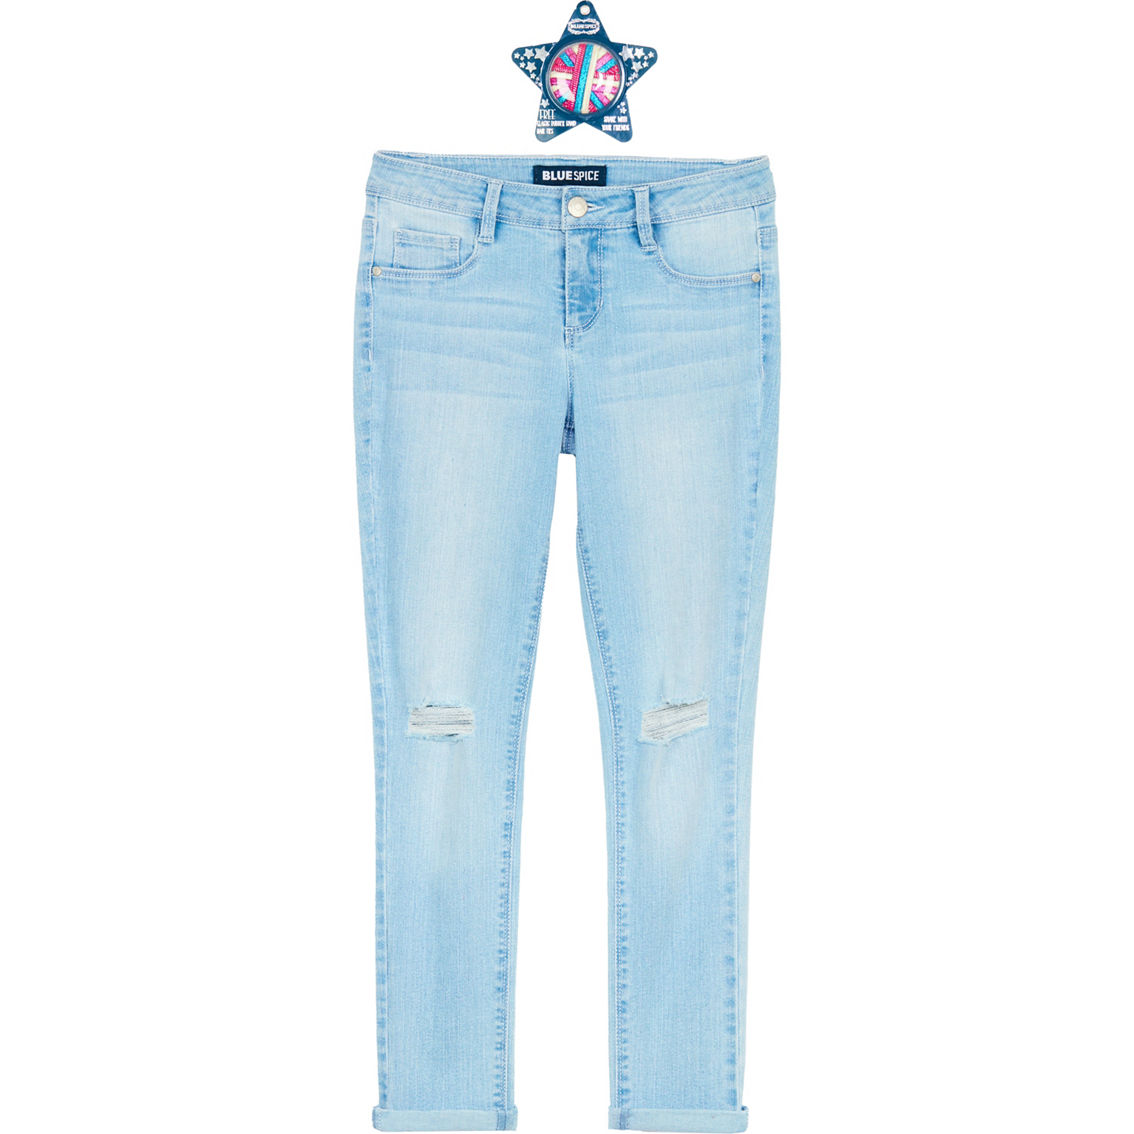 Squeeze Girls Blue Spice Skinny Jeans Gift With Purchase | Girls 7-16 ...